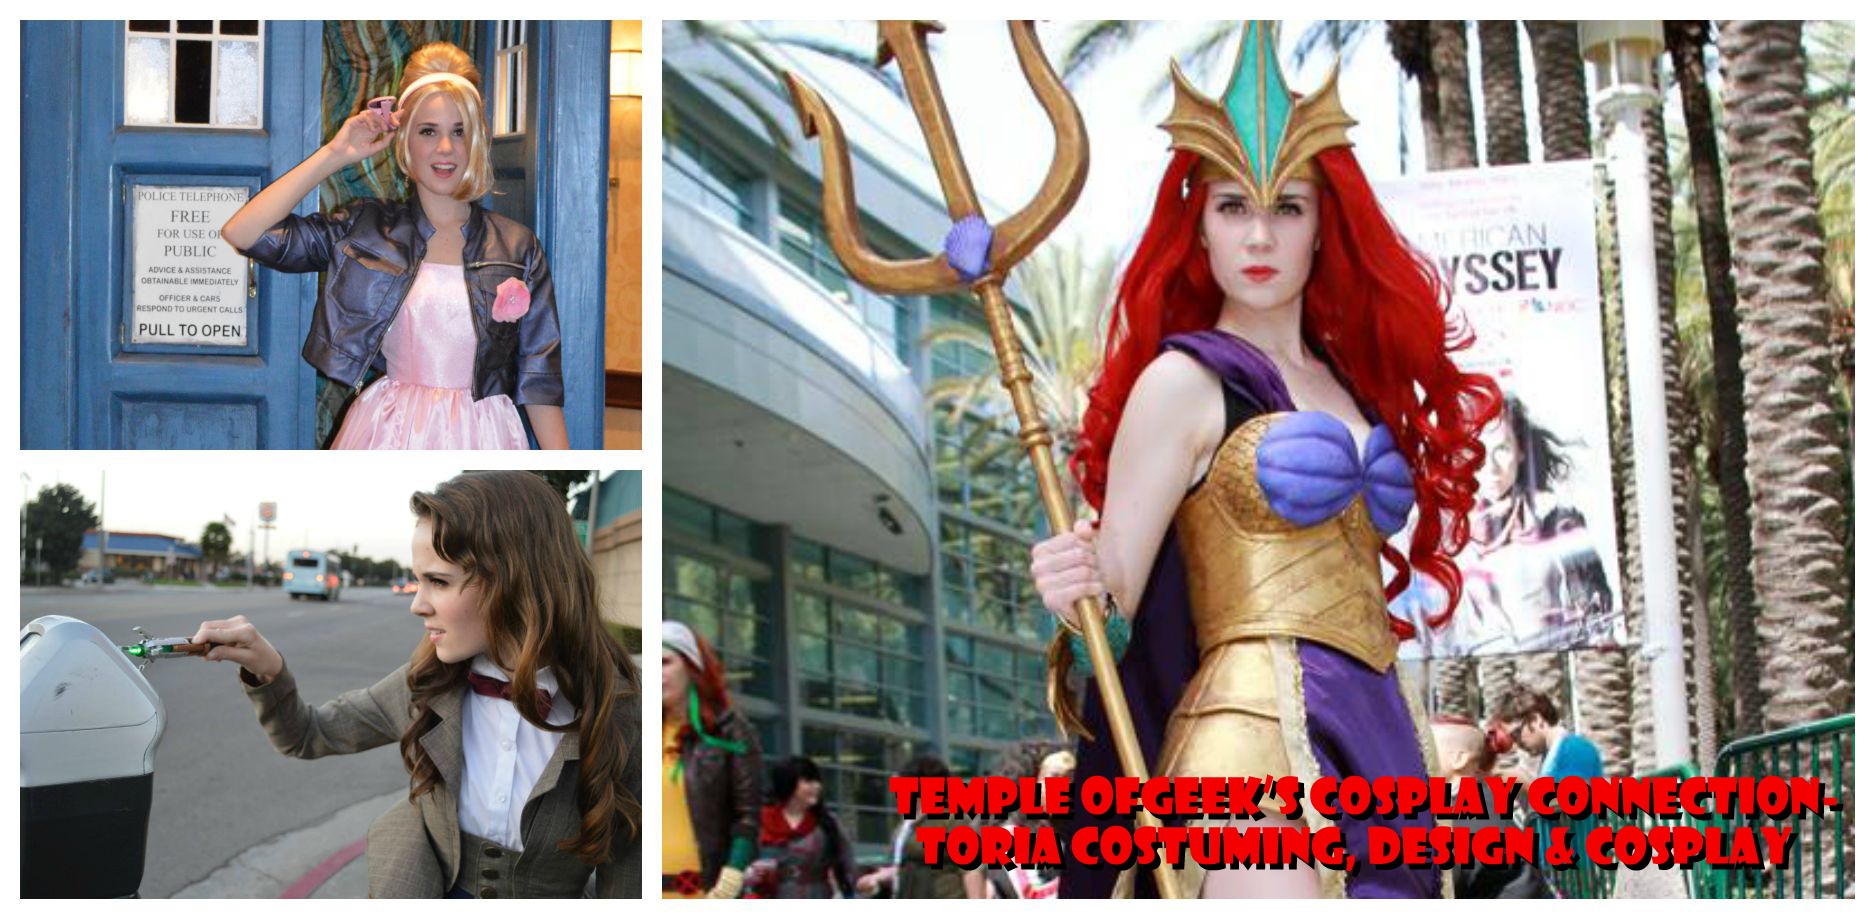 Cosplay Connection Episode 2 – Toria Costuming, Design & Cosplay